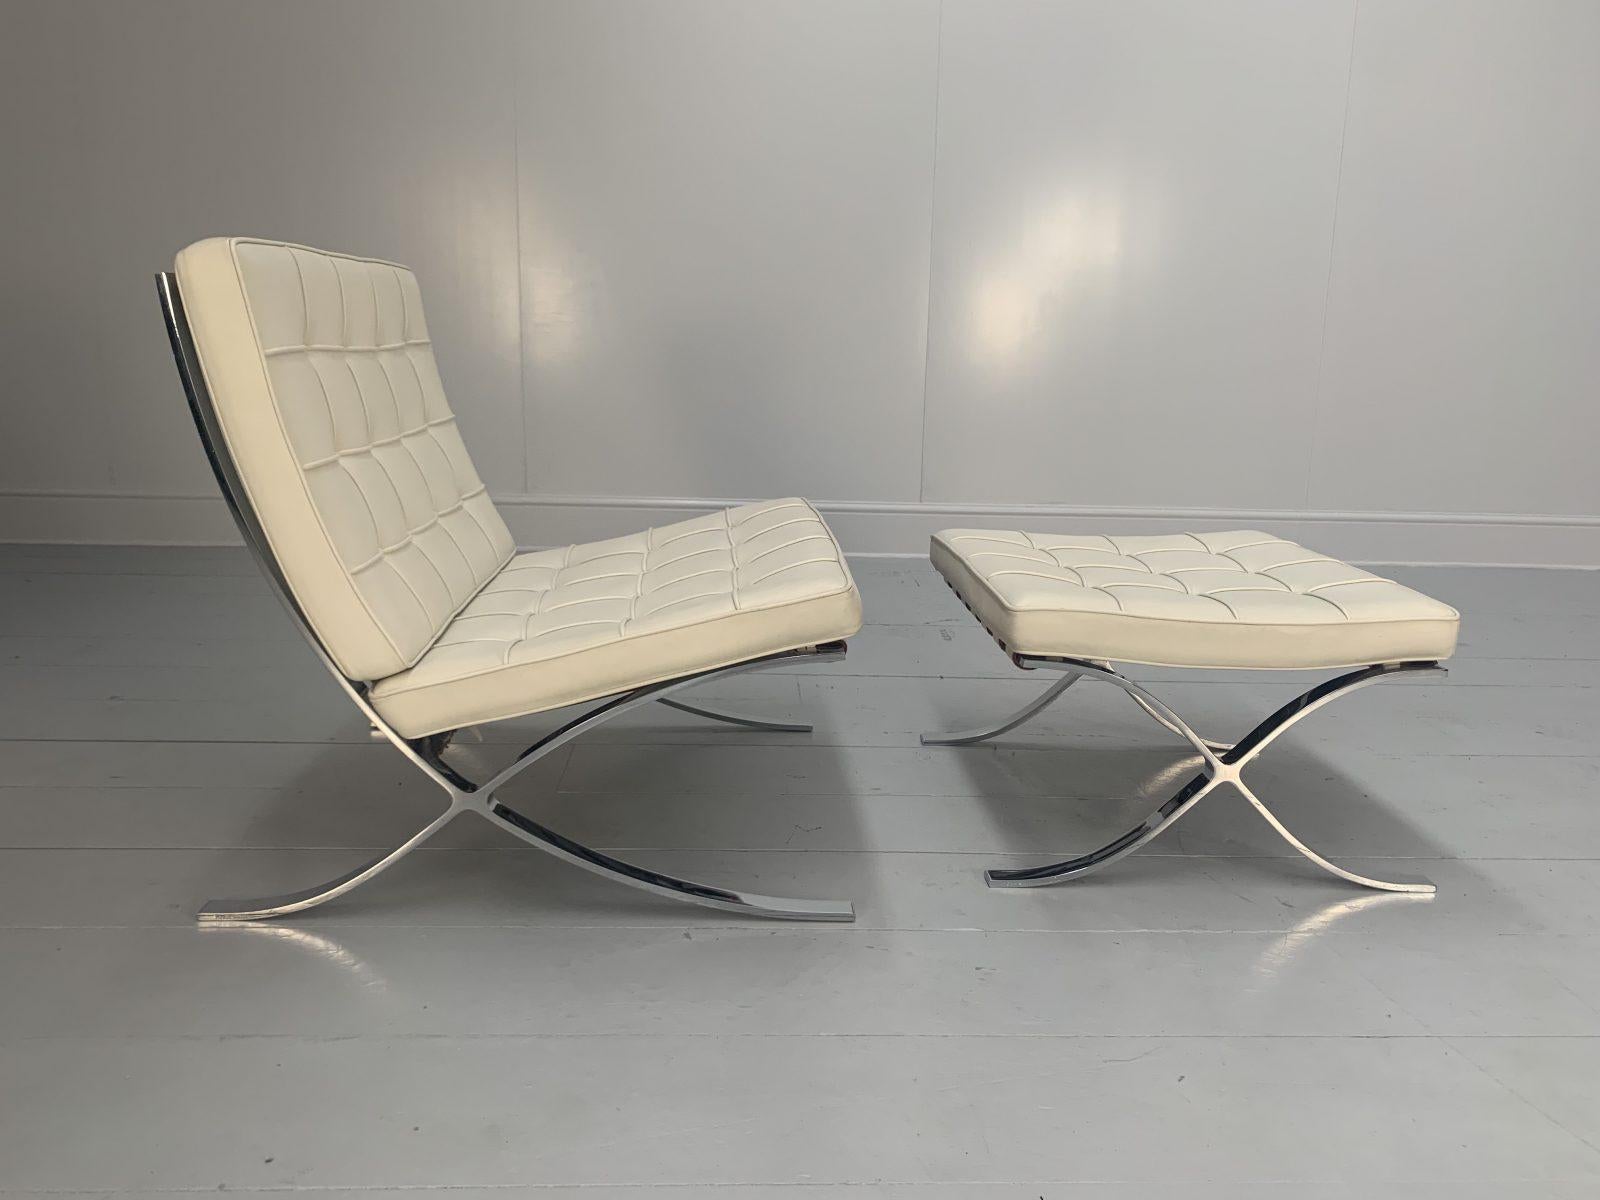 Knoll Studio “Barcelona” Lounge Chair & Ottoman” Suite in Ivory Leather 2